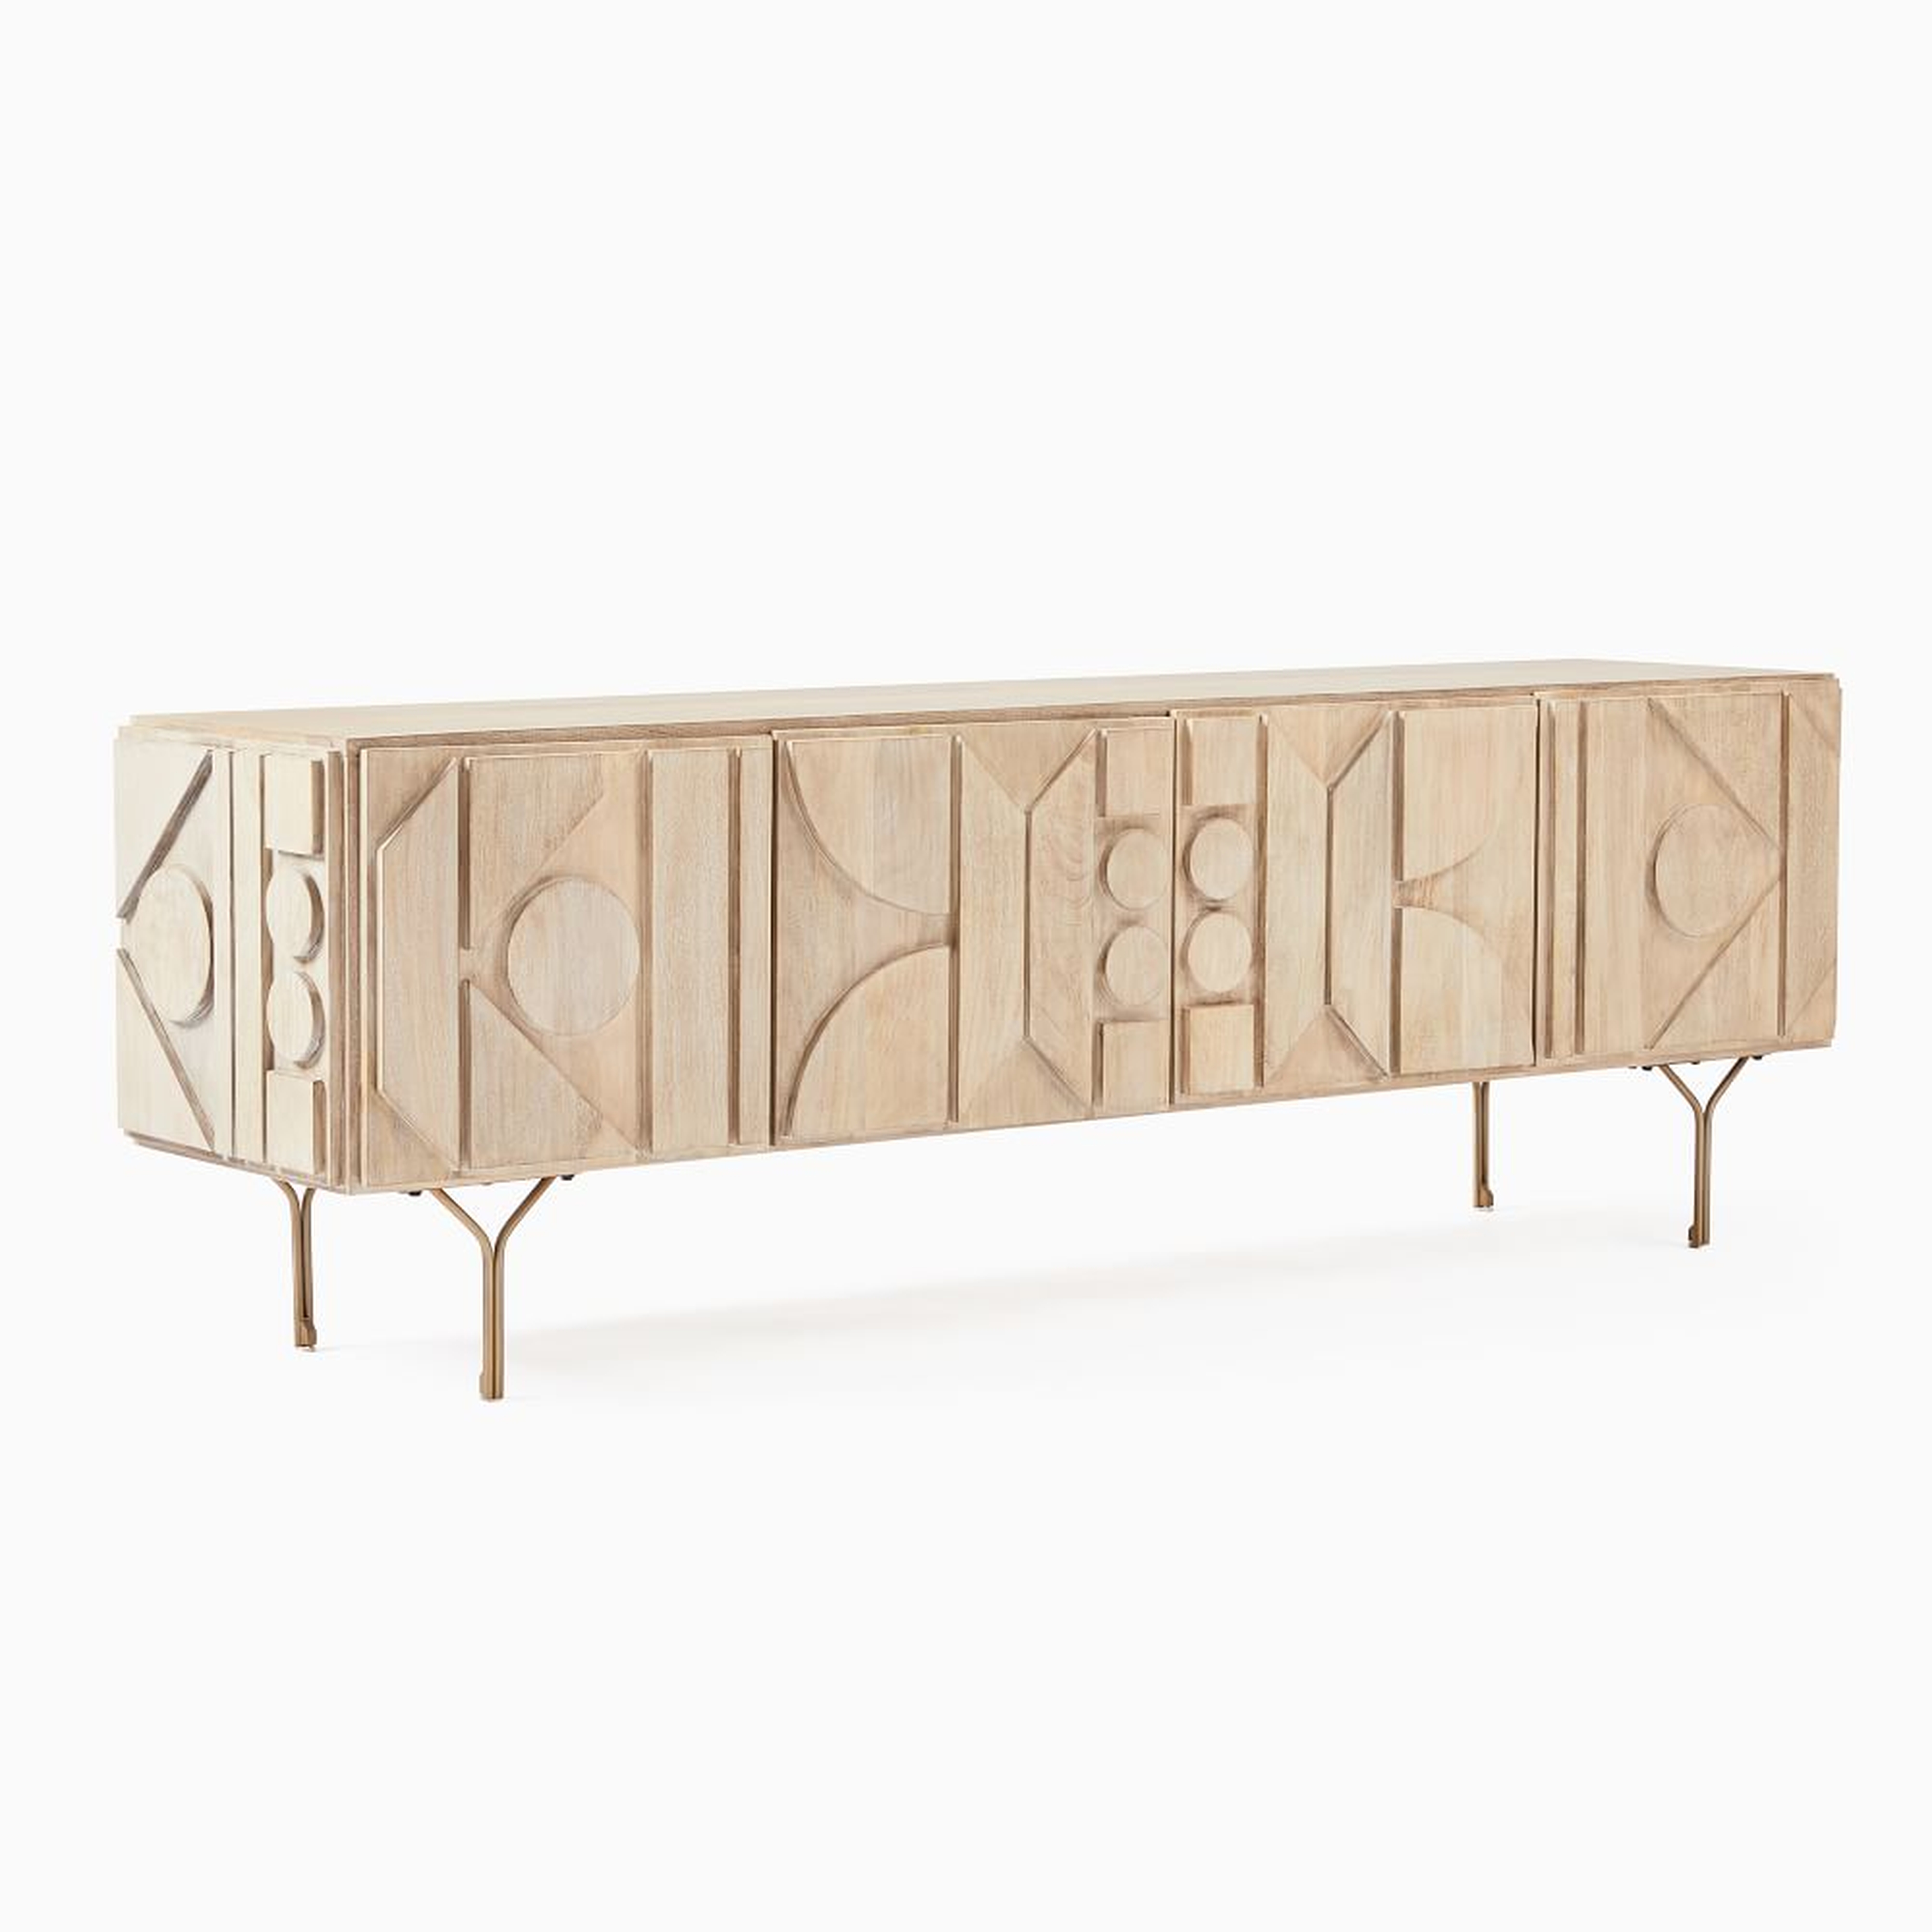 Pictograph Console, Cerused White, 84" - West Elm